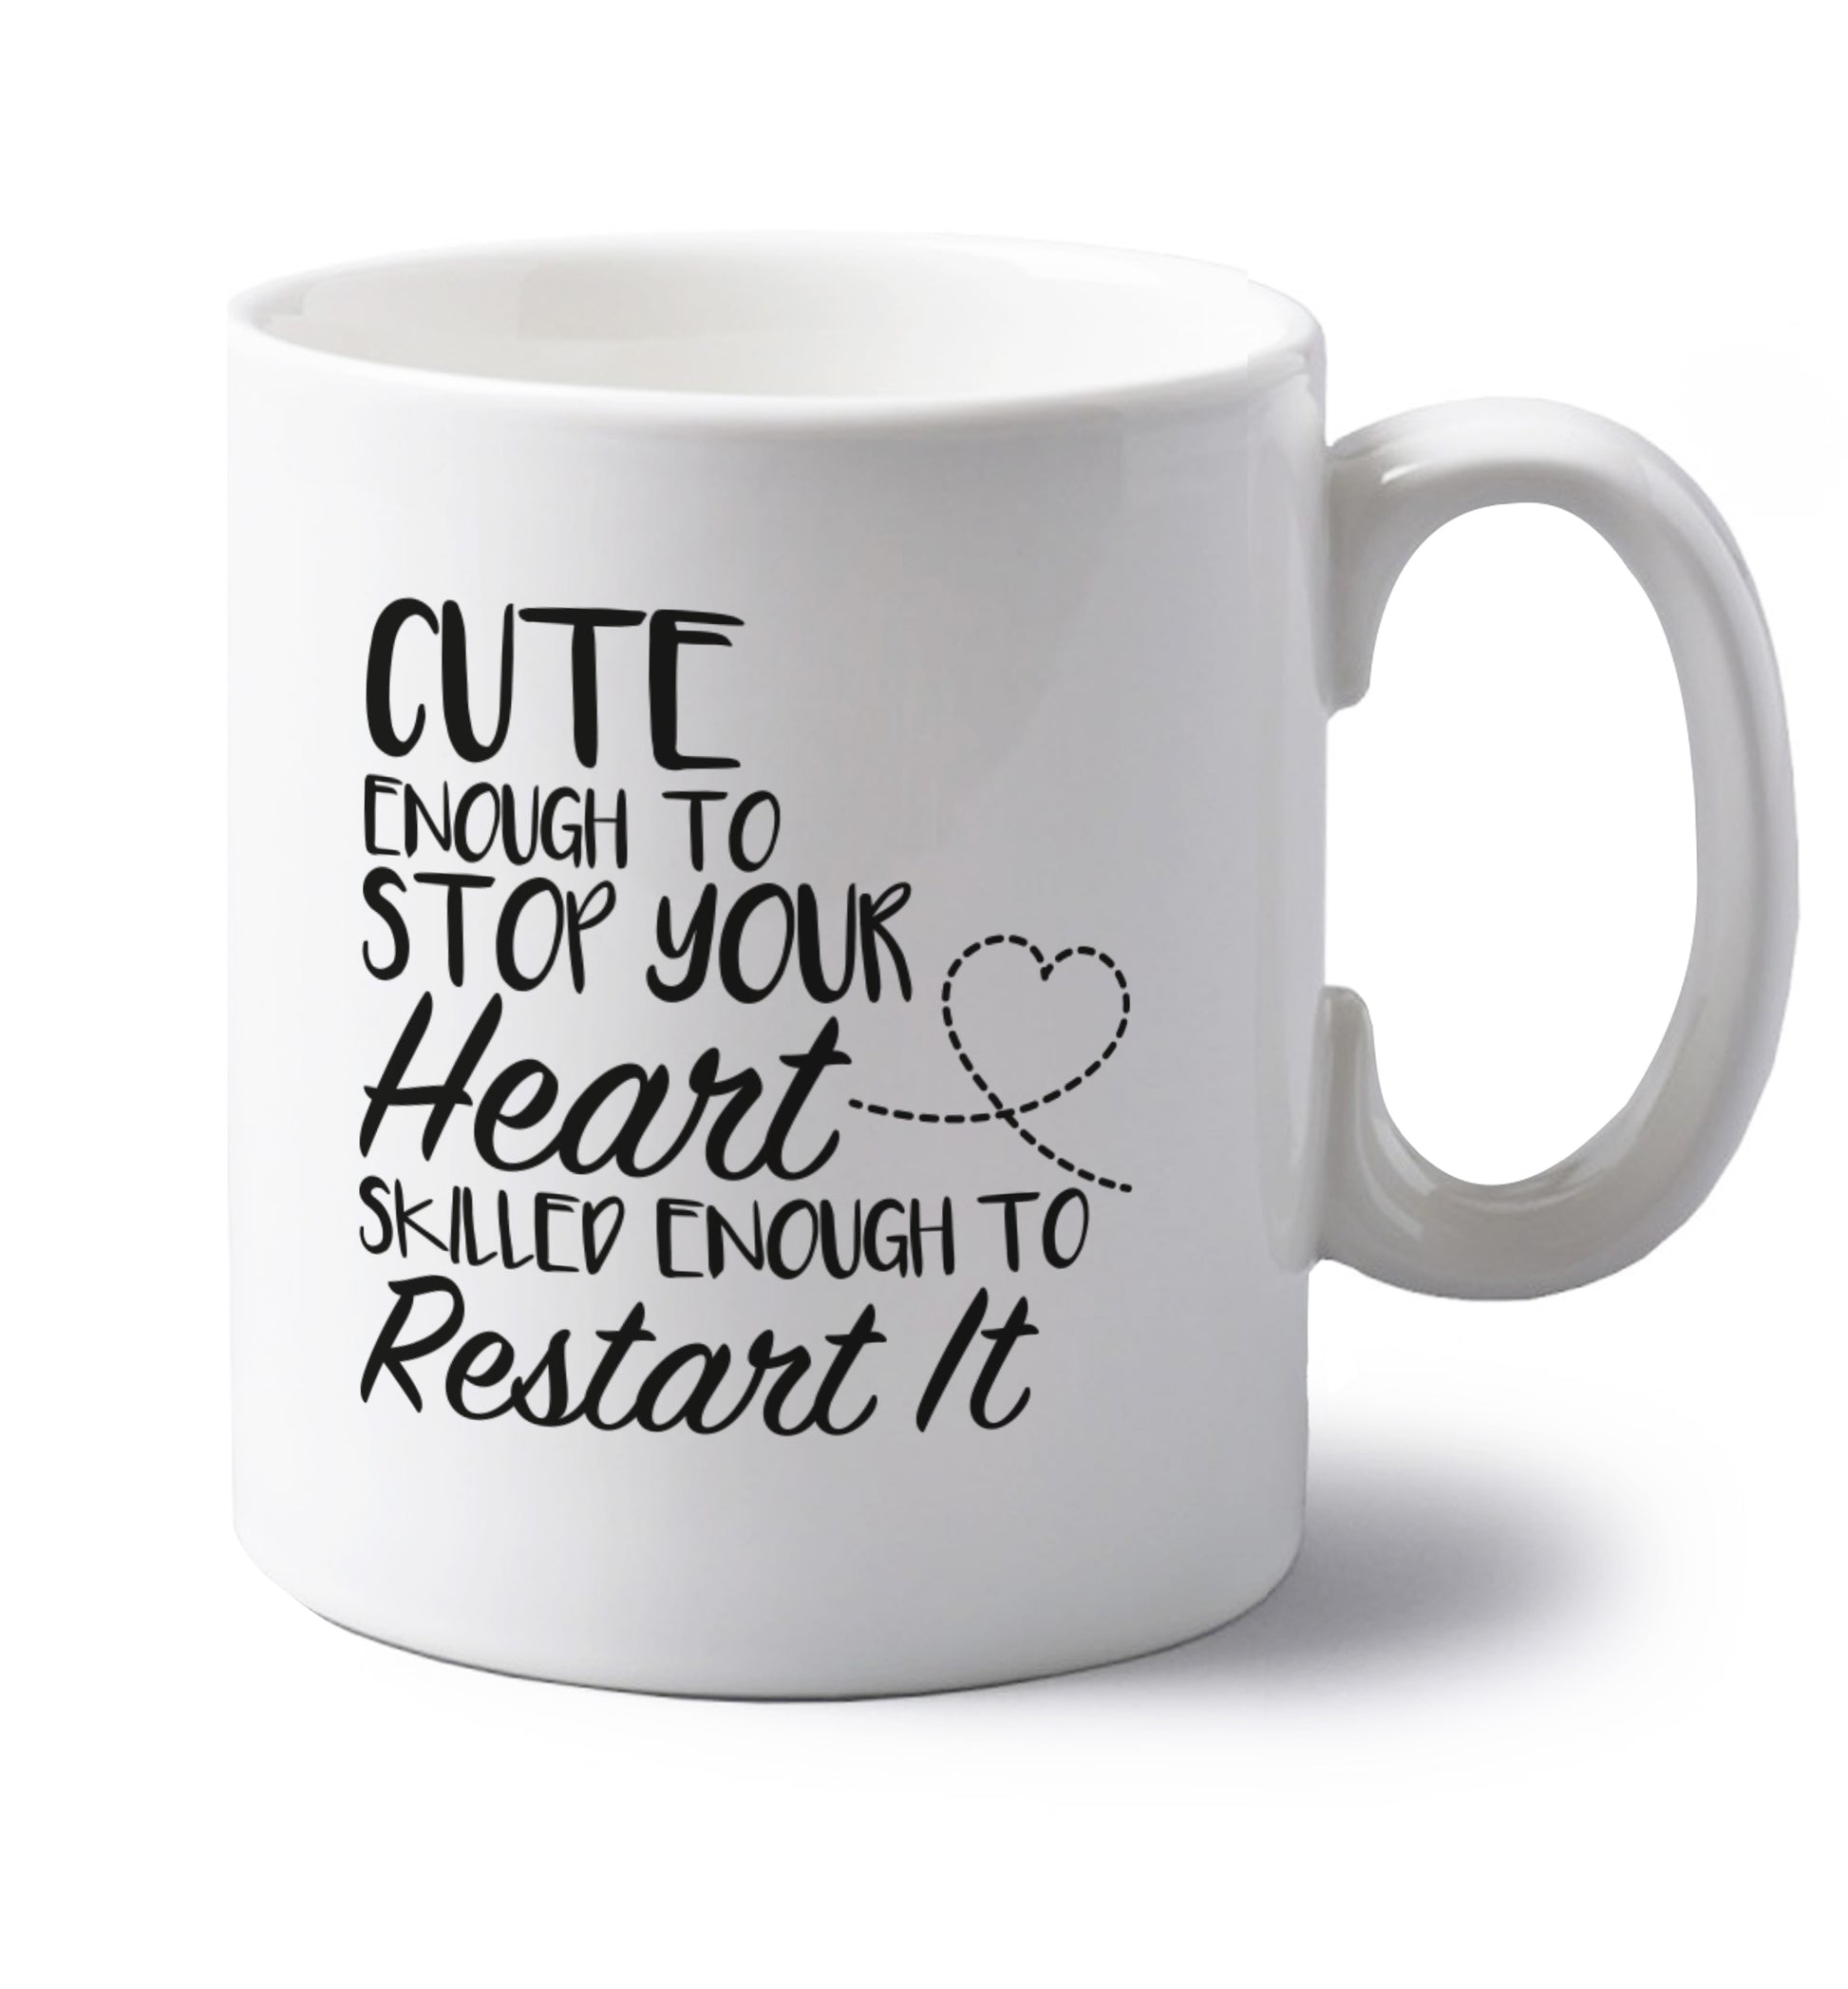 Cute enough to stop your heart skilled enough to restart it left handed white ceramic mug 